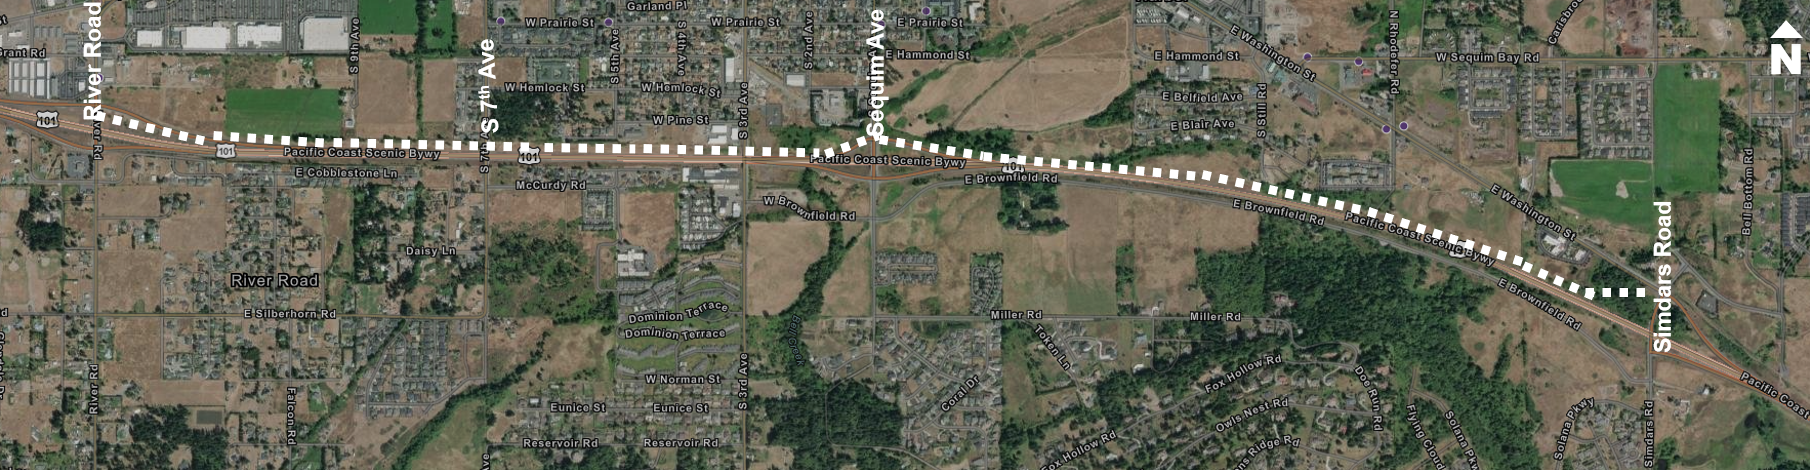 An aerial map of US 101 from River Road to Simdars Road showing a shared-use path along the highway.